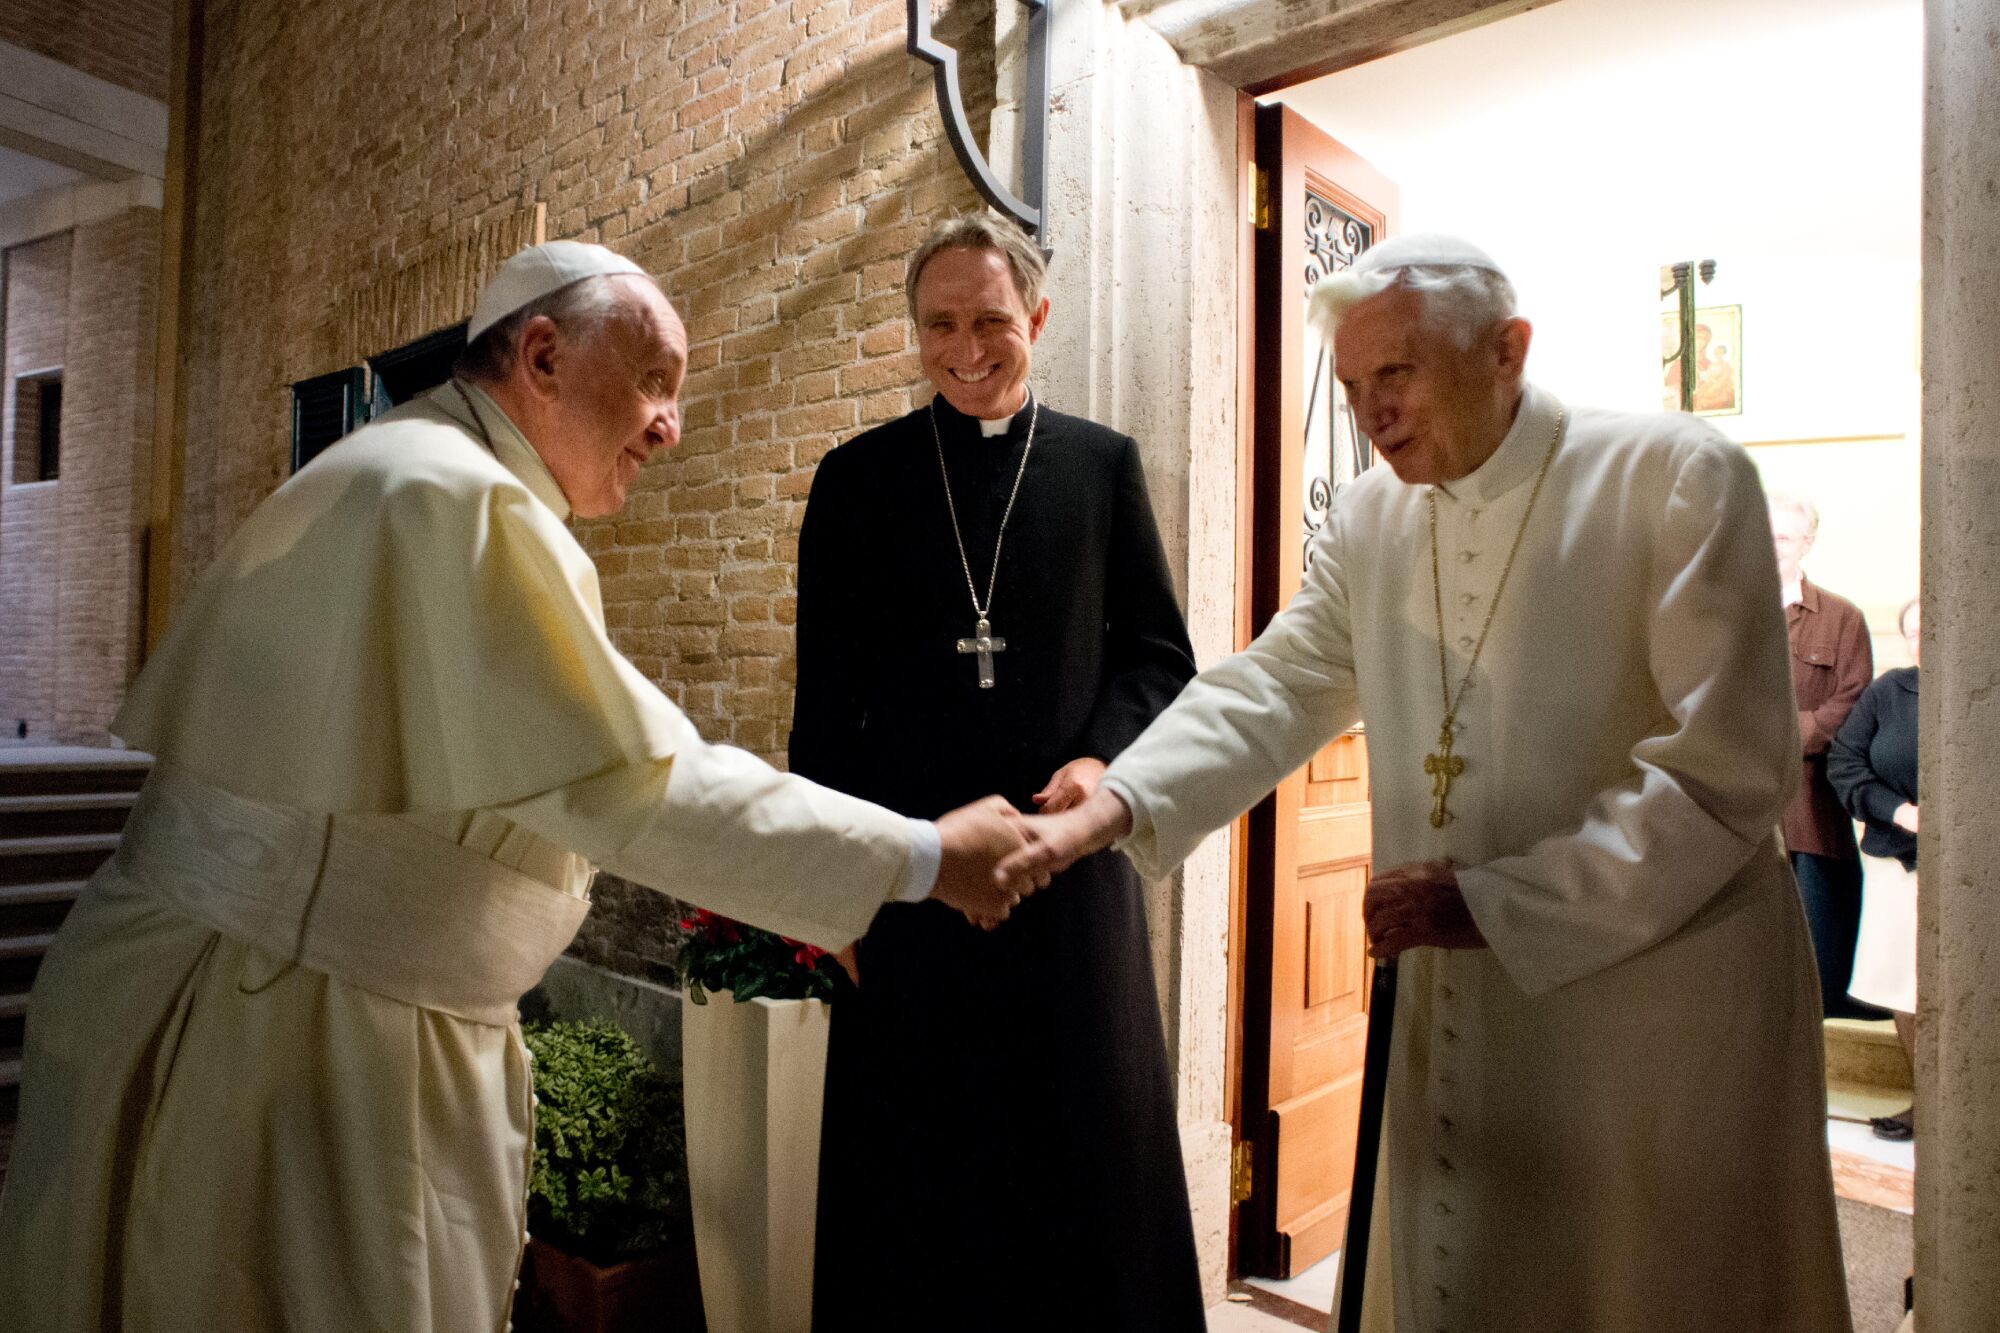 Pope Francis and Pope Emeritus Benedict XVI shake hands while a priest looks on.